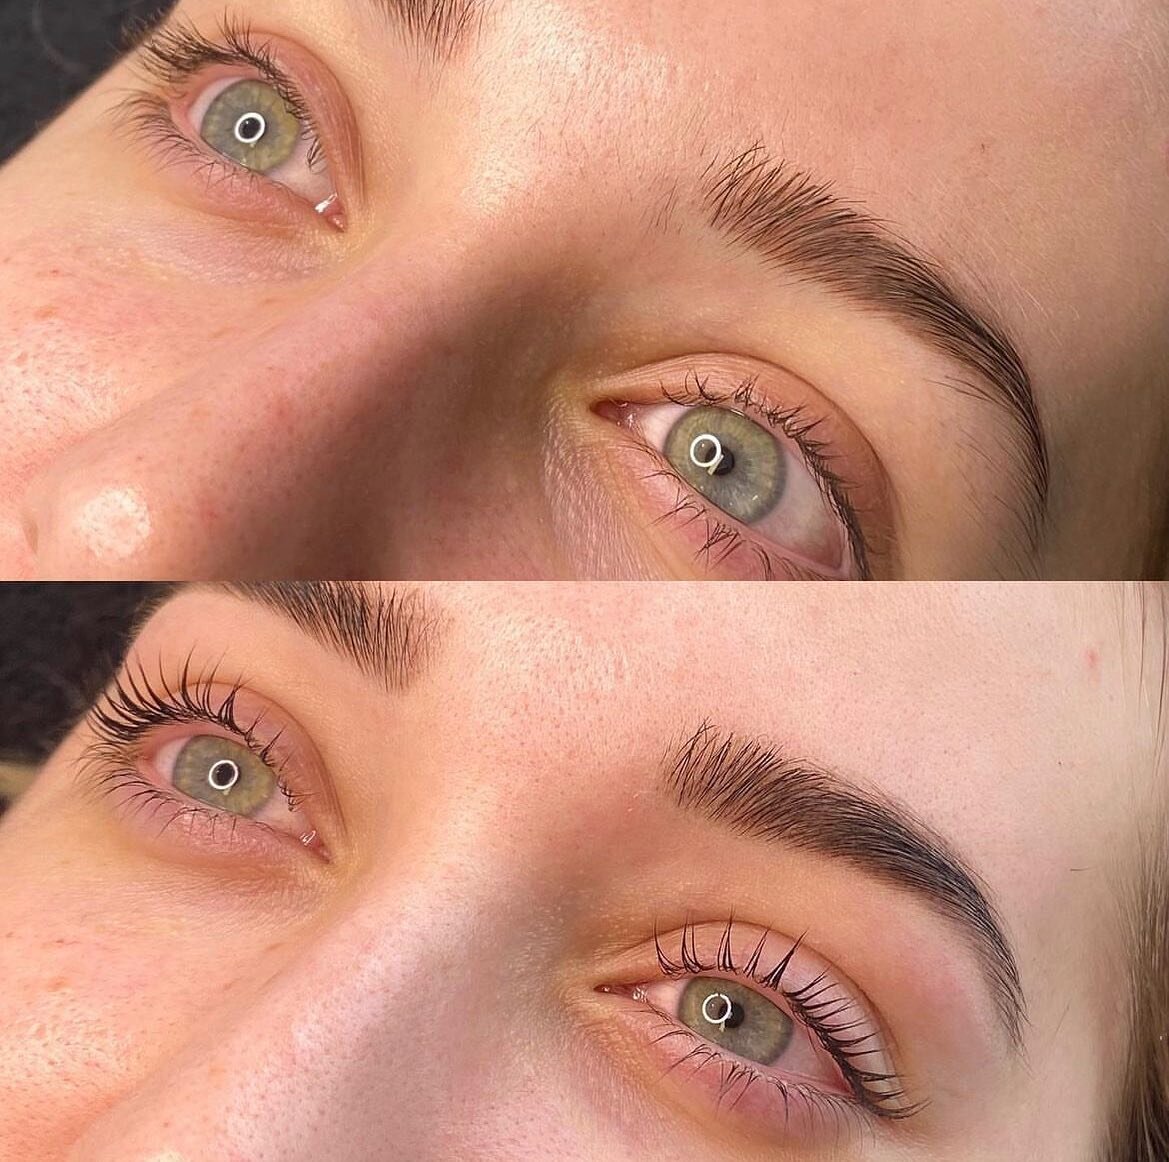 Shayanne killing the lash and brow game 💪🏼
@aesthetikbeautyco 

Shayanne is operating out of Skin Ritual Studio on Monday evenings, Wednesdays &amp; Saturdays ✨

Visit her IG to make a booking! 
👉🏼 @aesthetikbeautyco 
&bull;
&bull;
&bull;
&bull;
